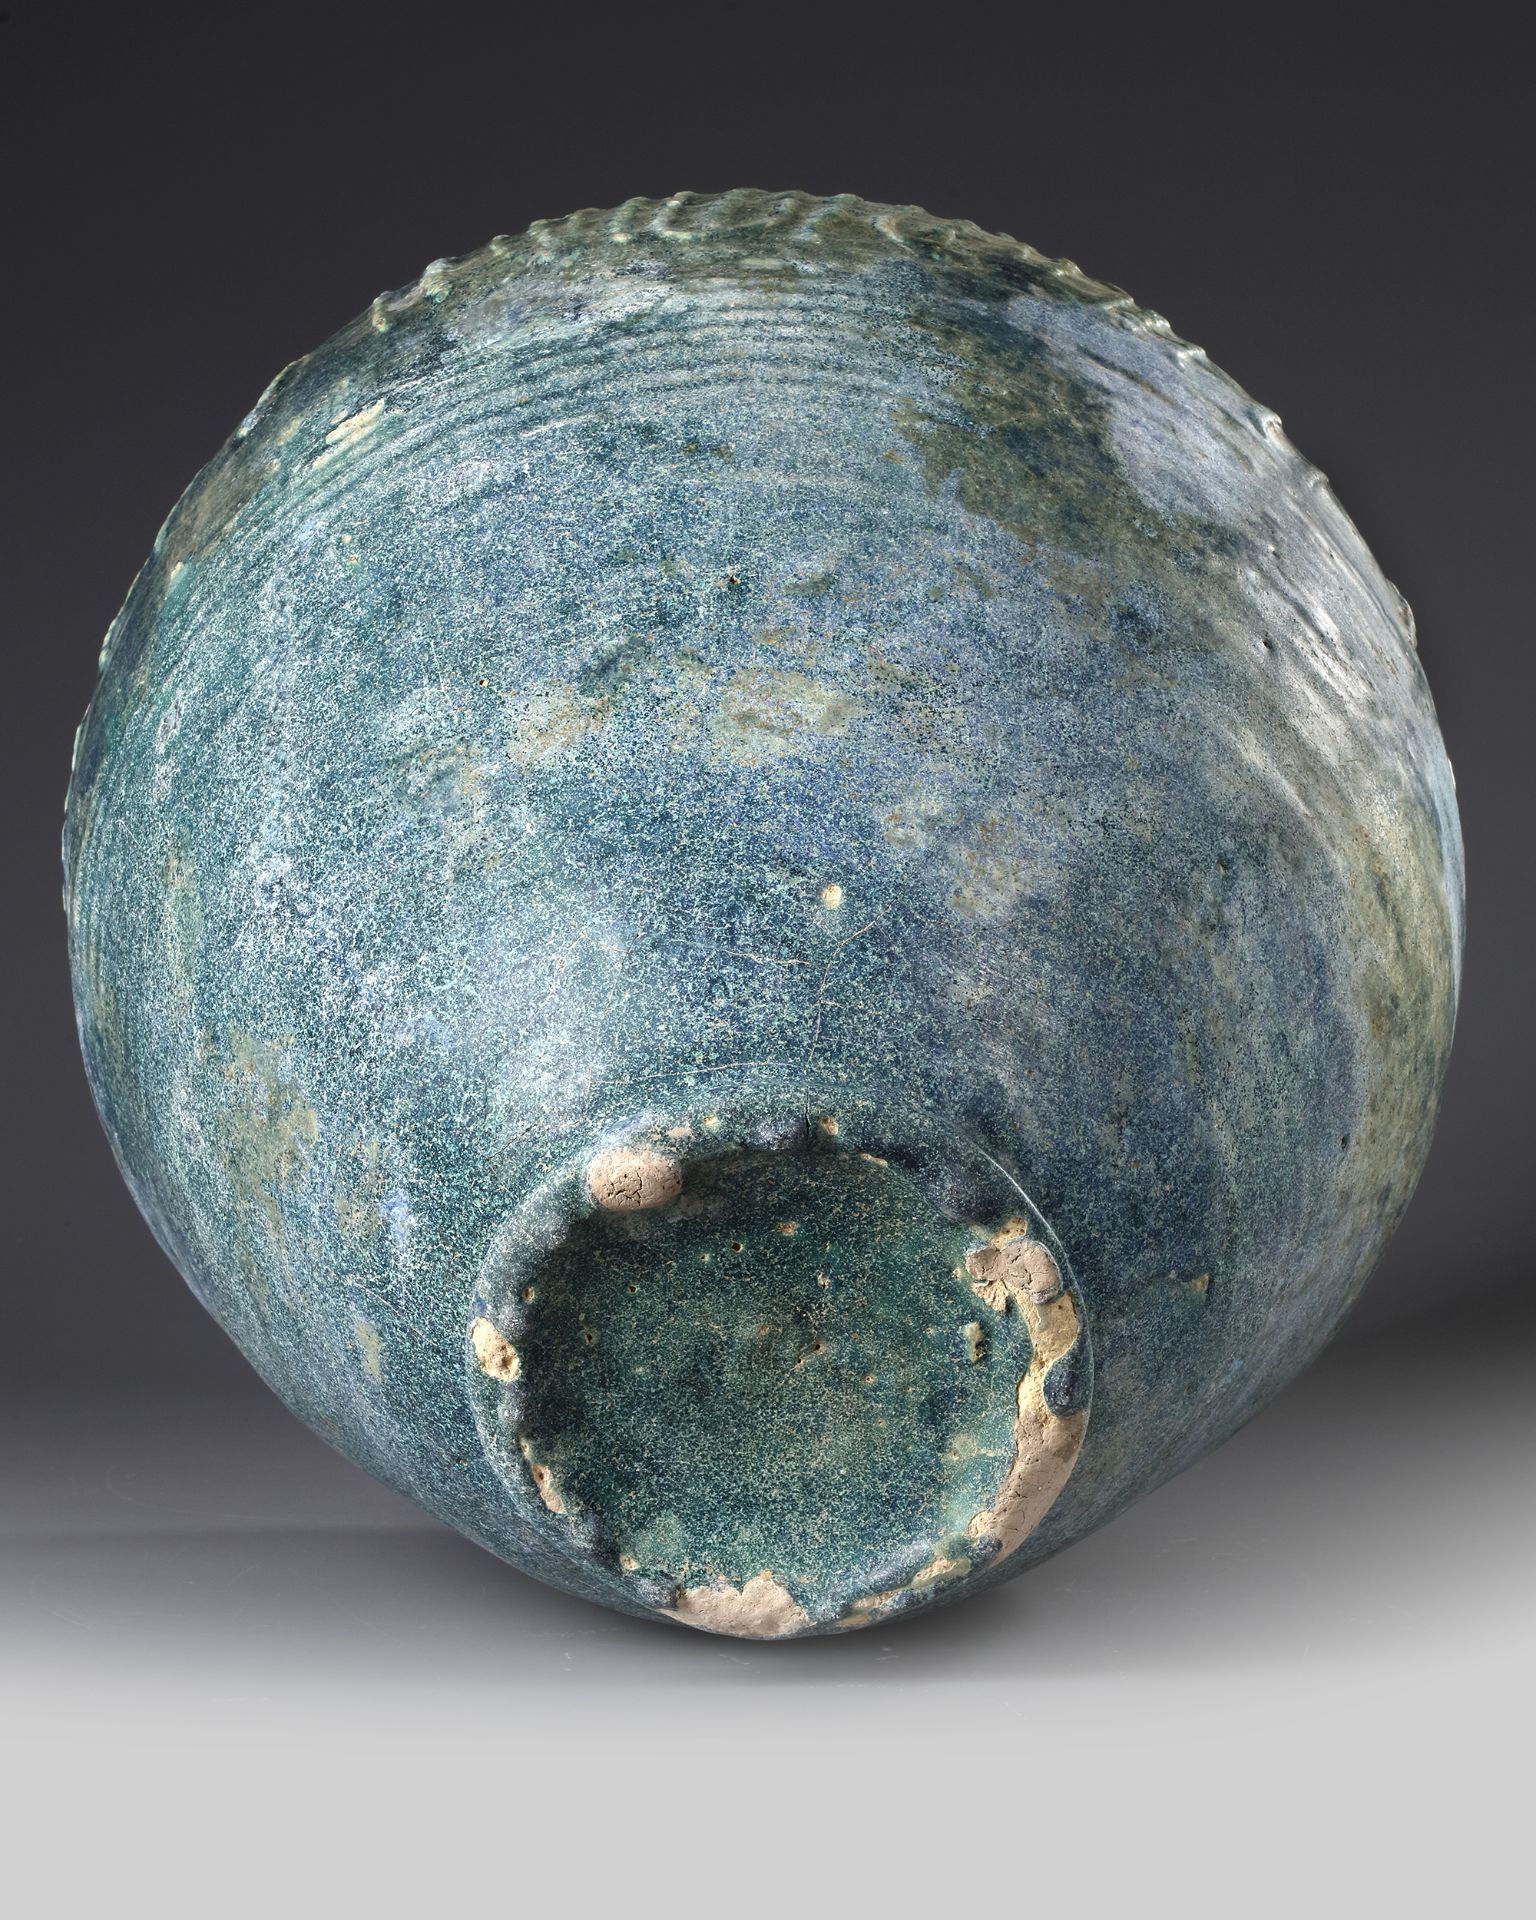 A LARGE POST SASSANIAN TURQUOISE GLAZED POTTERY STORAGE JAR, PERSIA OR IRAQ, 7TH-8TH CENTURY - Image 4 of 5